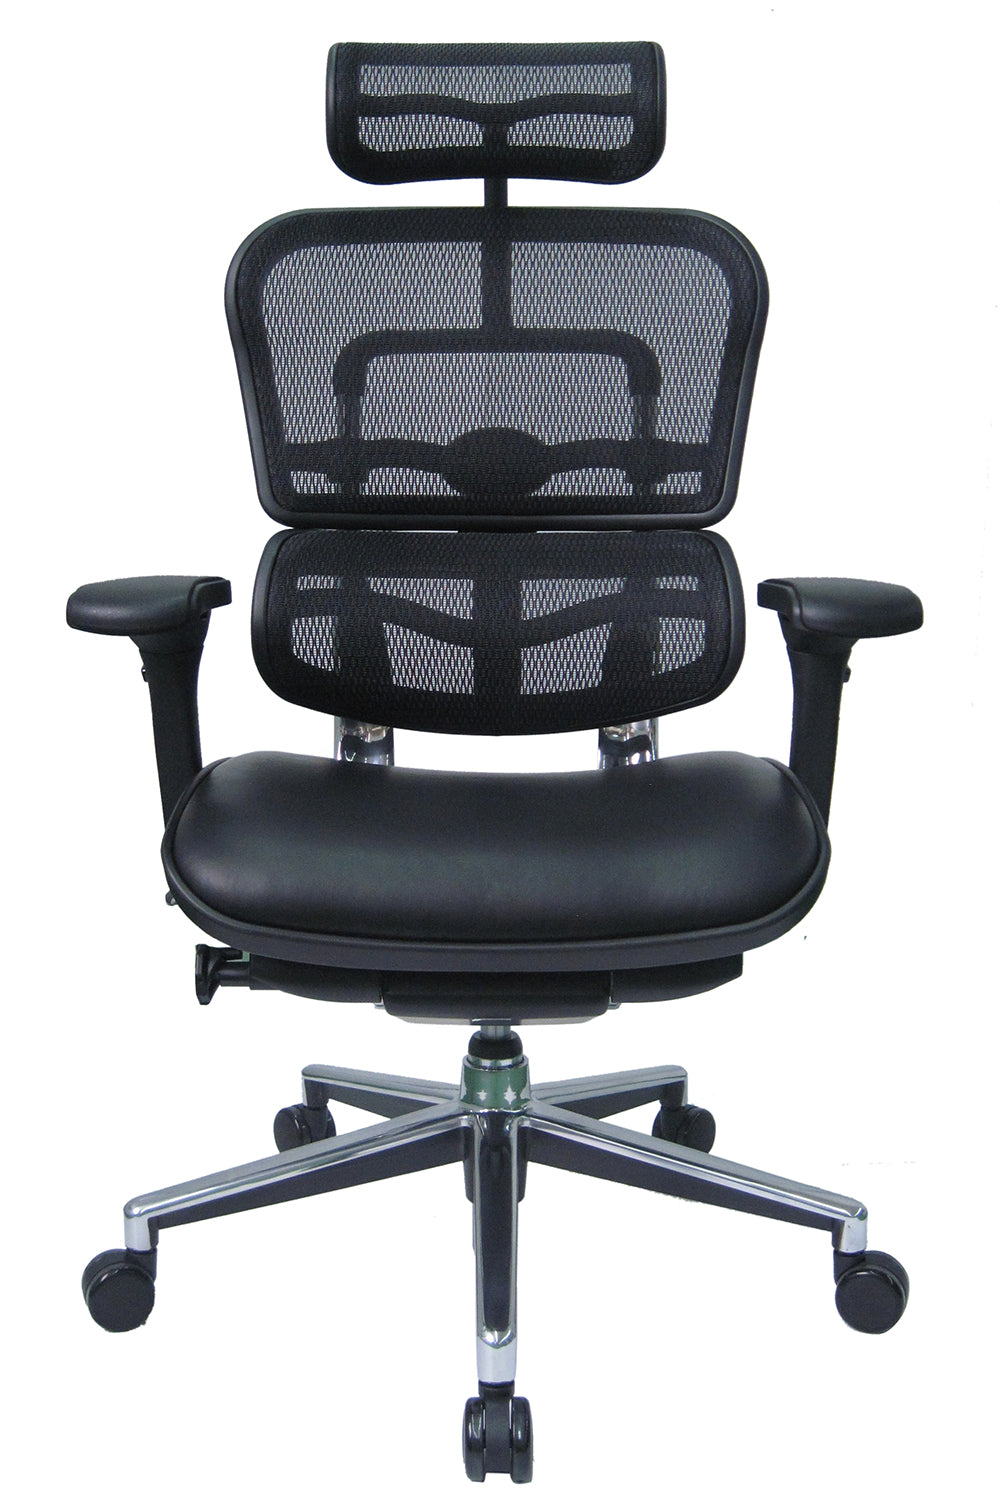 Maxwell Premium Executive Office High Back chair Leather Seat with 5D Armrest and Aluminum Base - Black